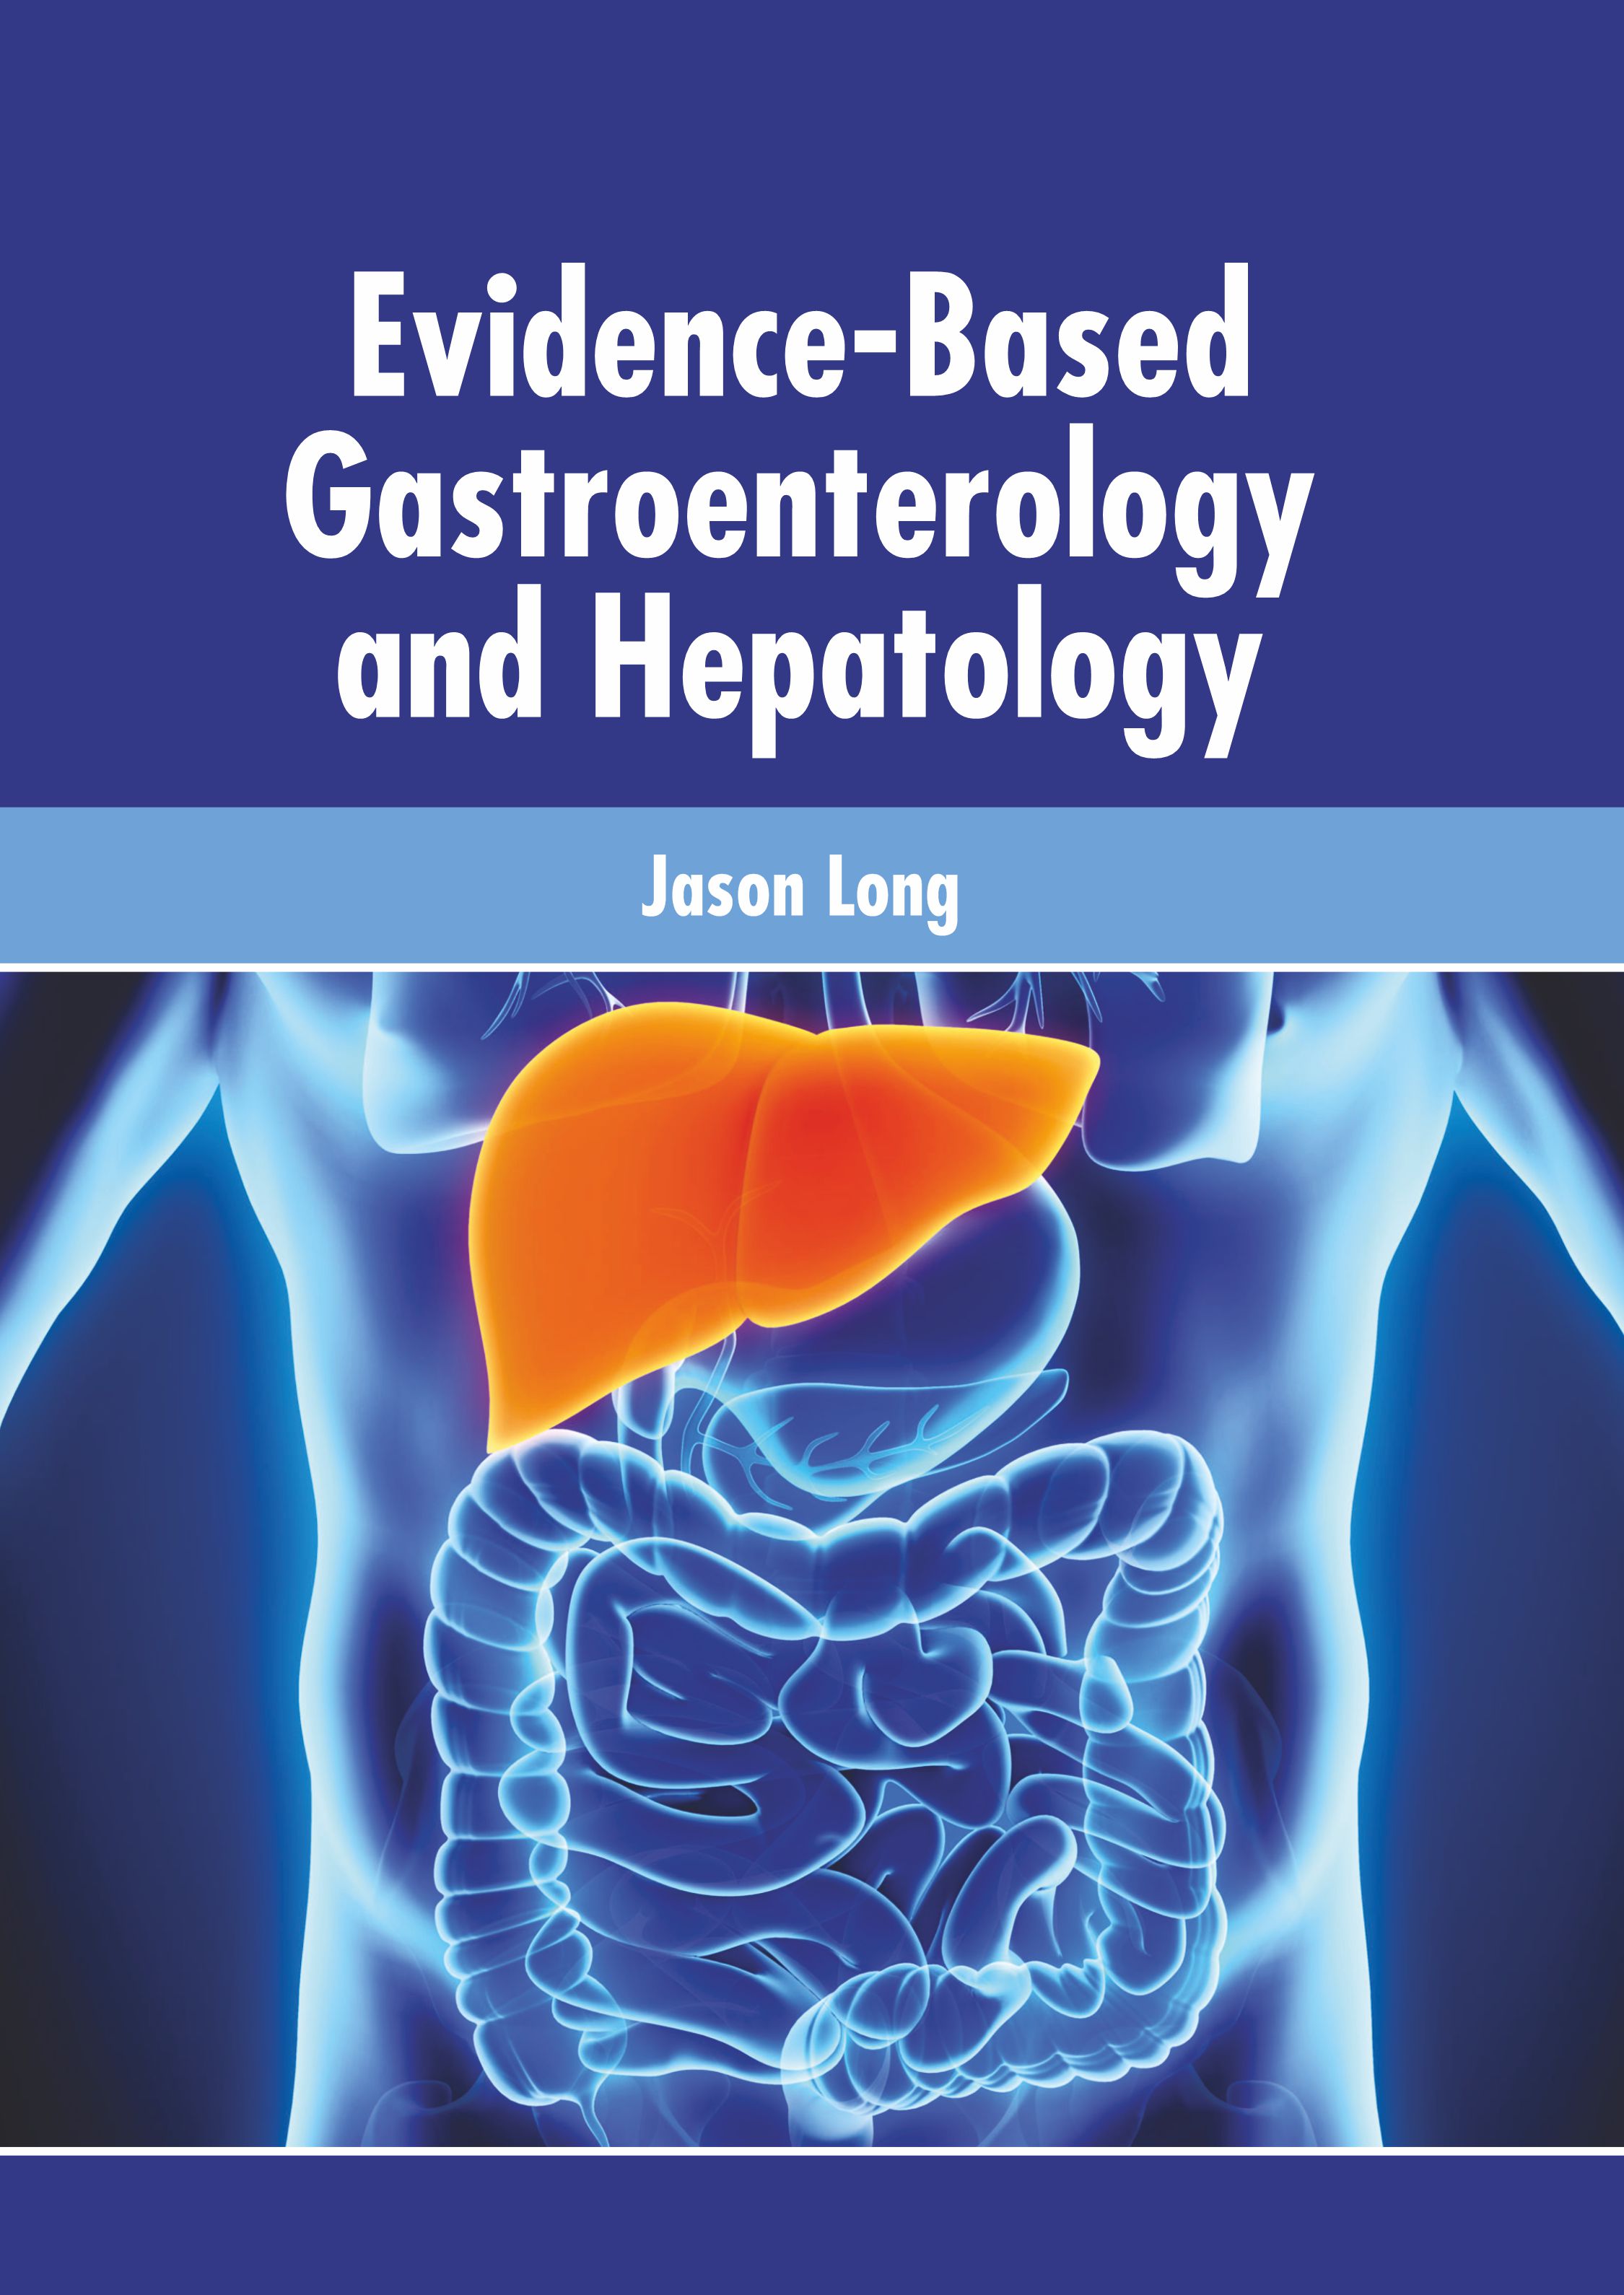 exclusive-publishers/american-medical-publishers/evidence-based-gastroenterology-and-hepatology-9781639271382